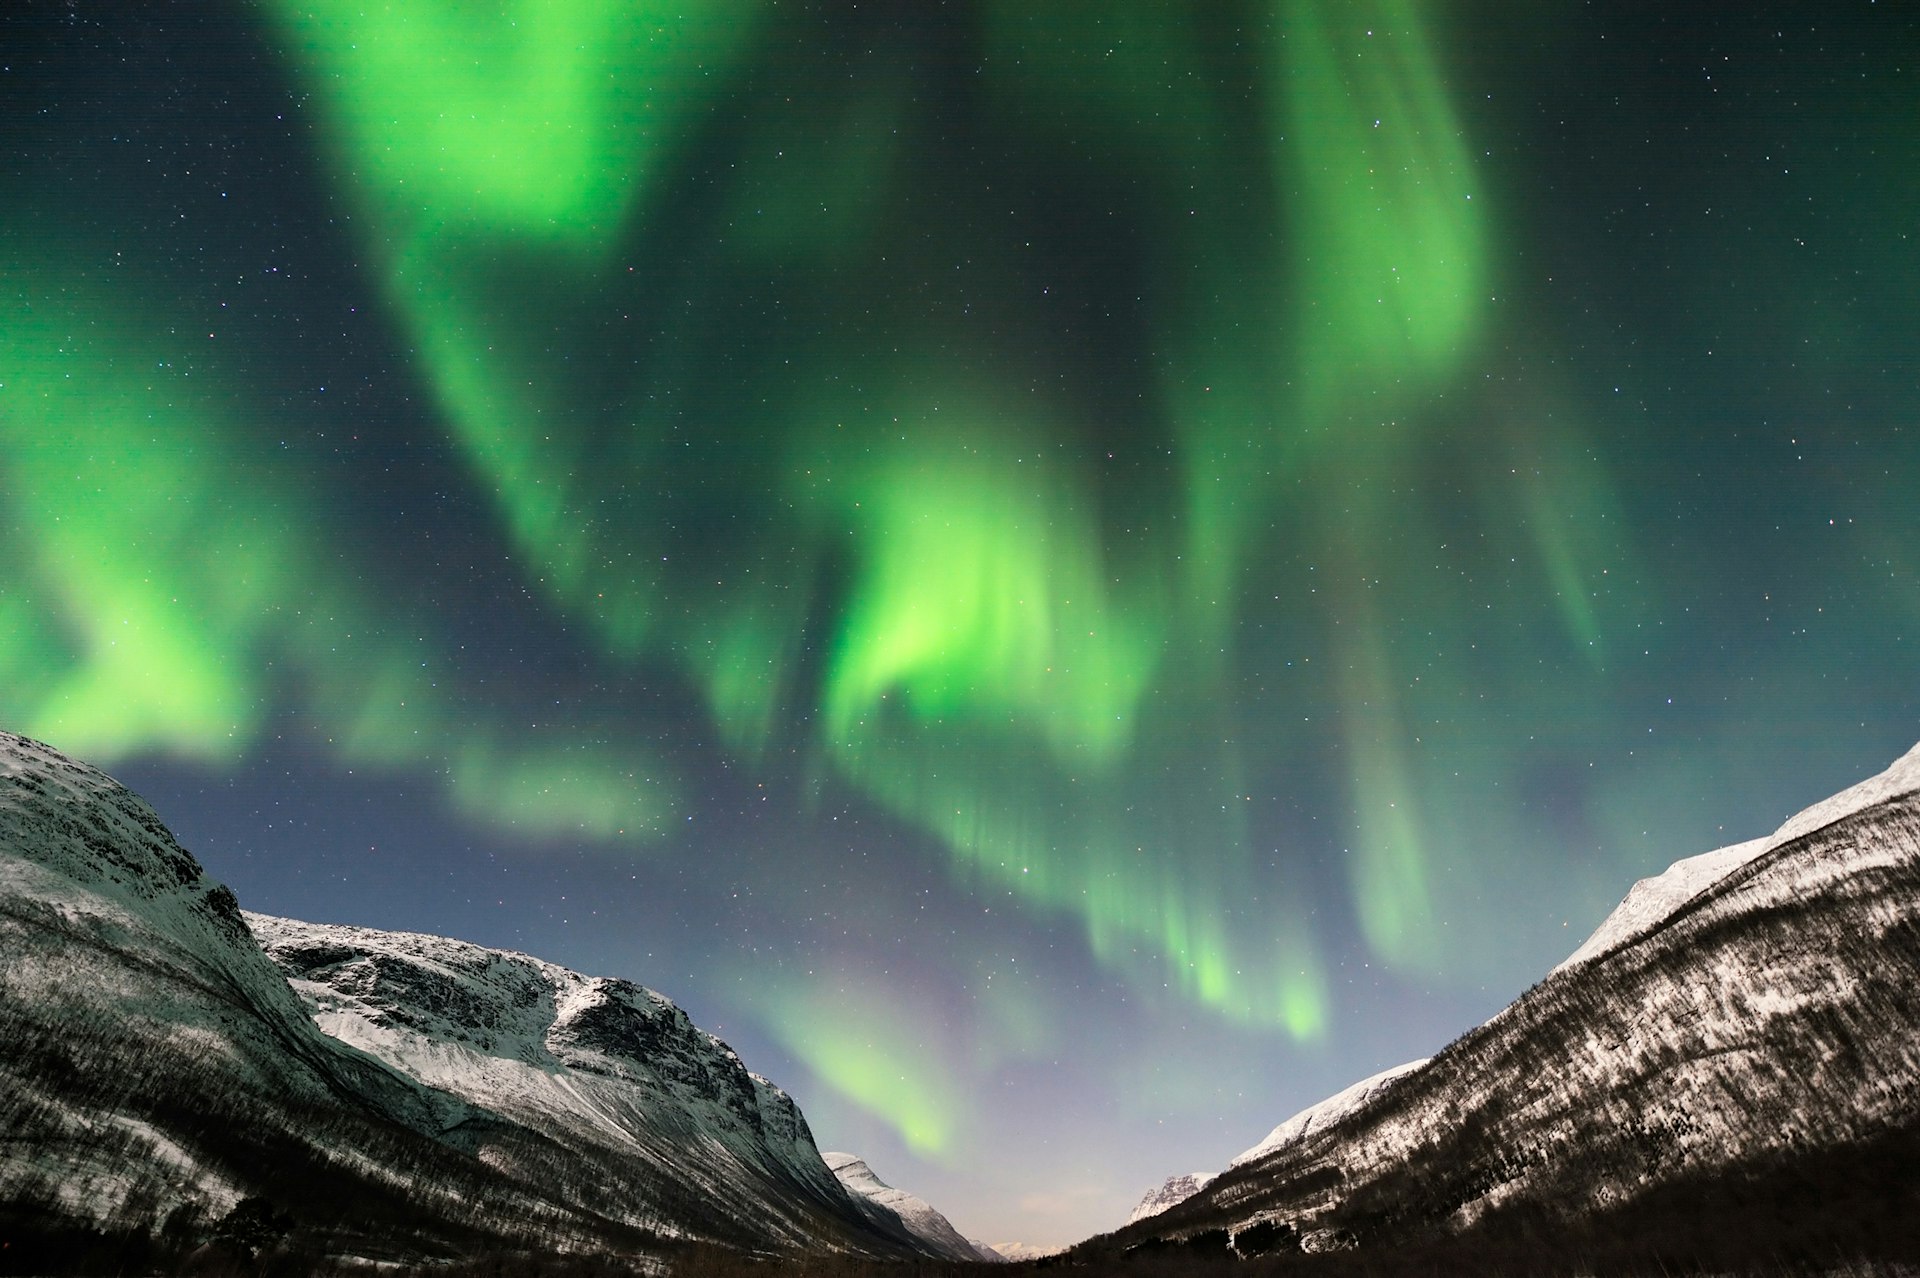 The Northern lights over Tromso